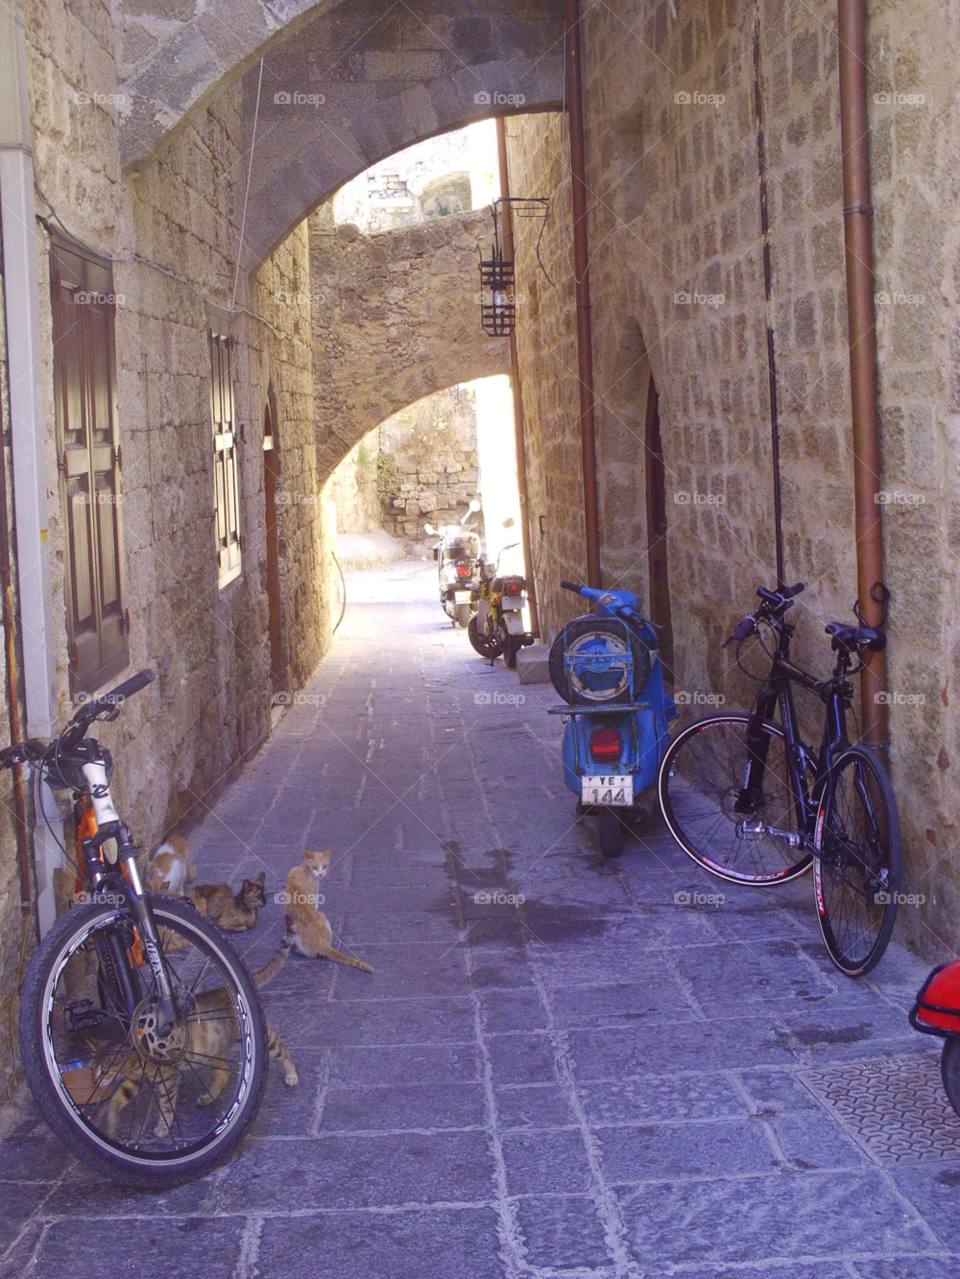 arched alleyway in lindos rhodes nosey cats watching by pawright68